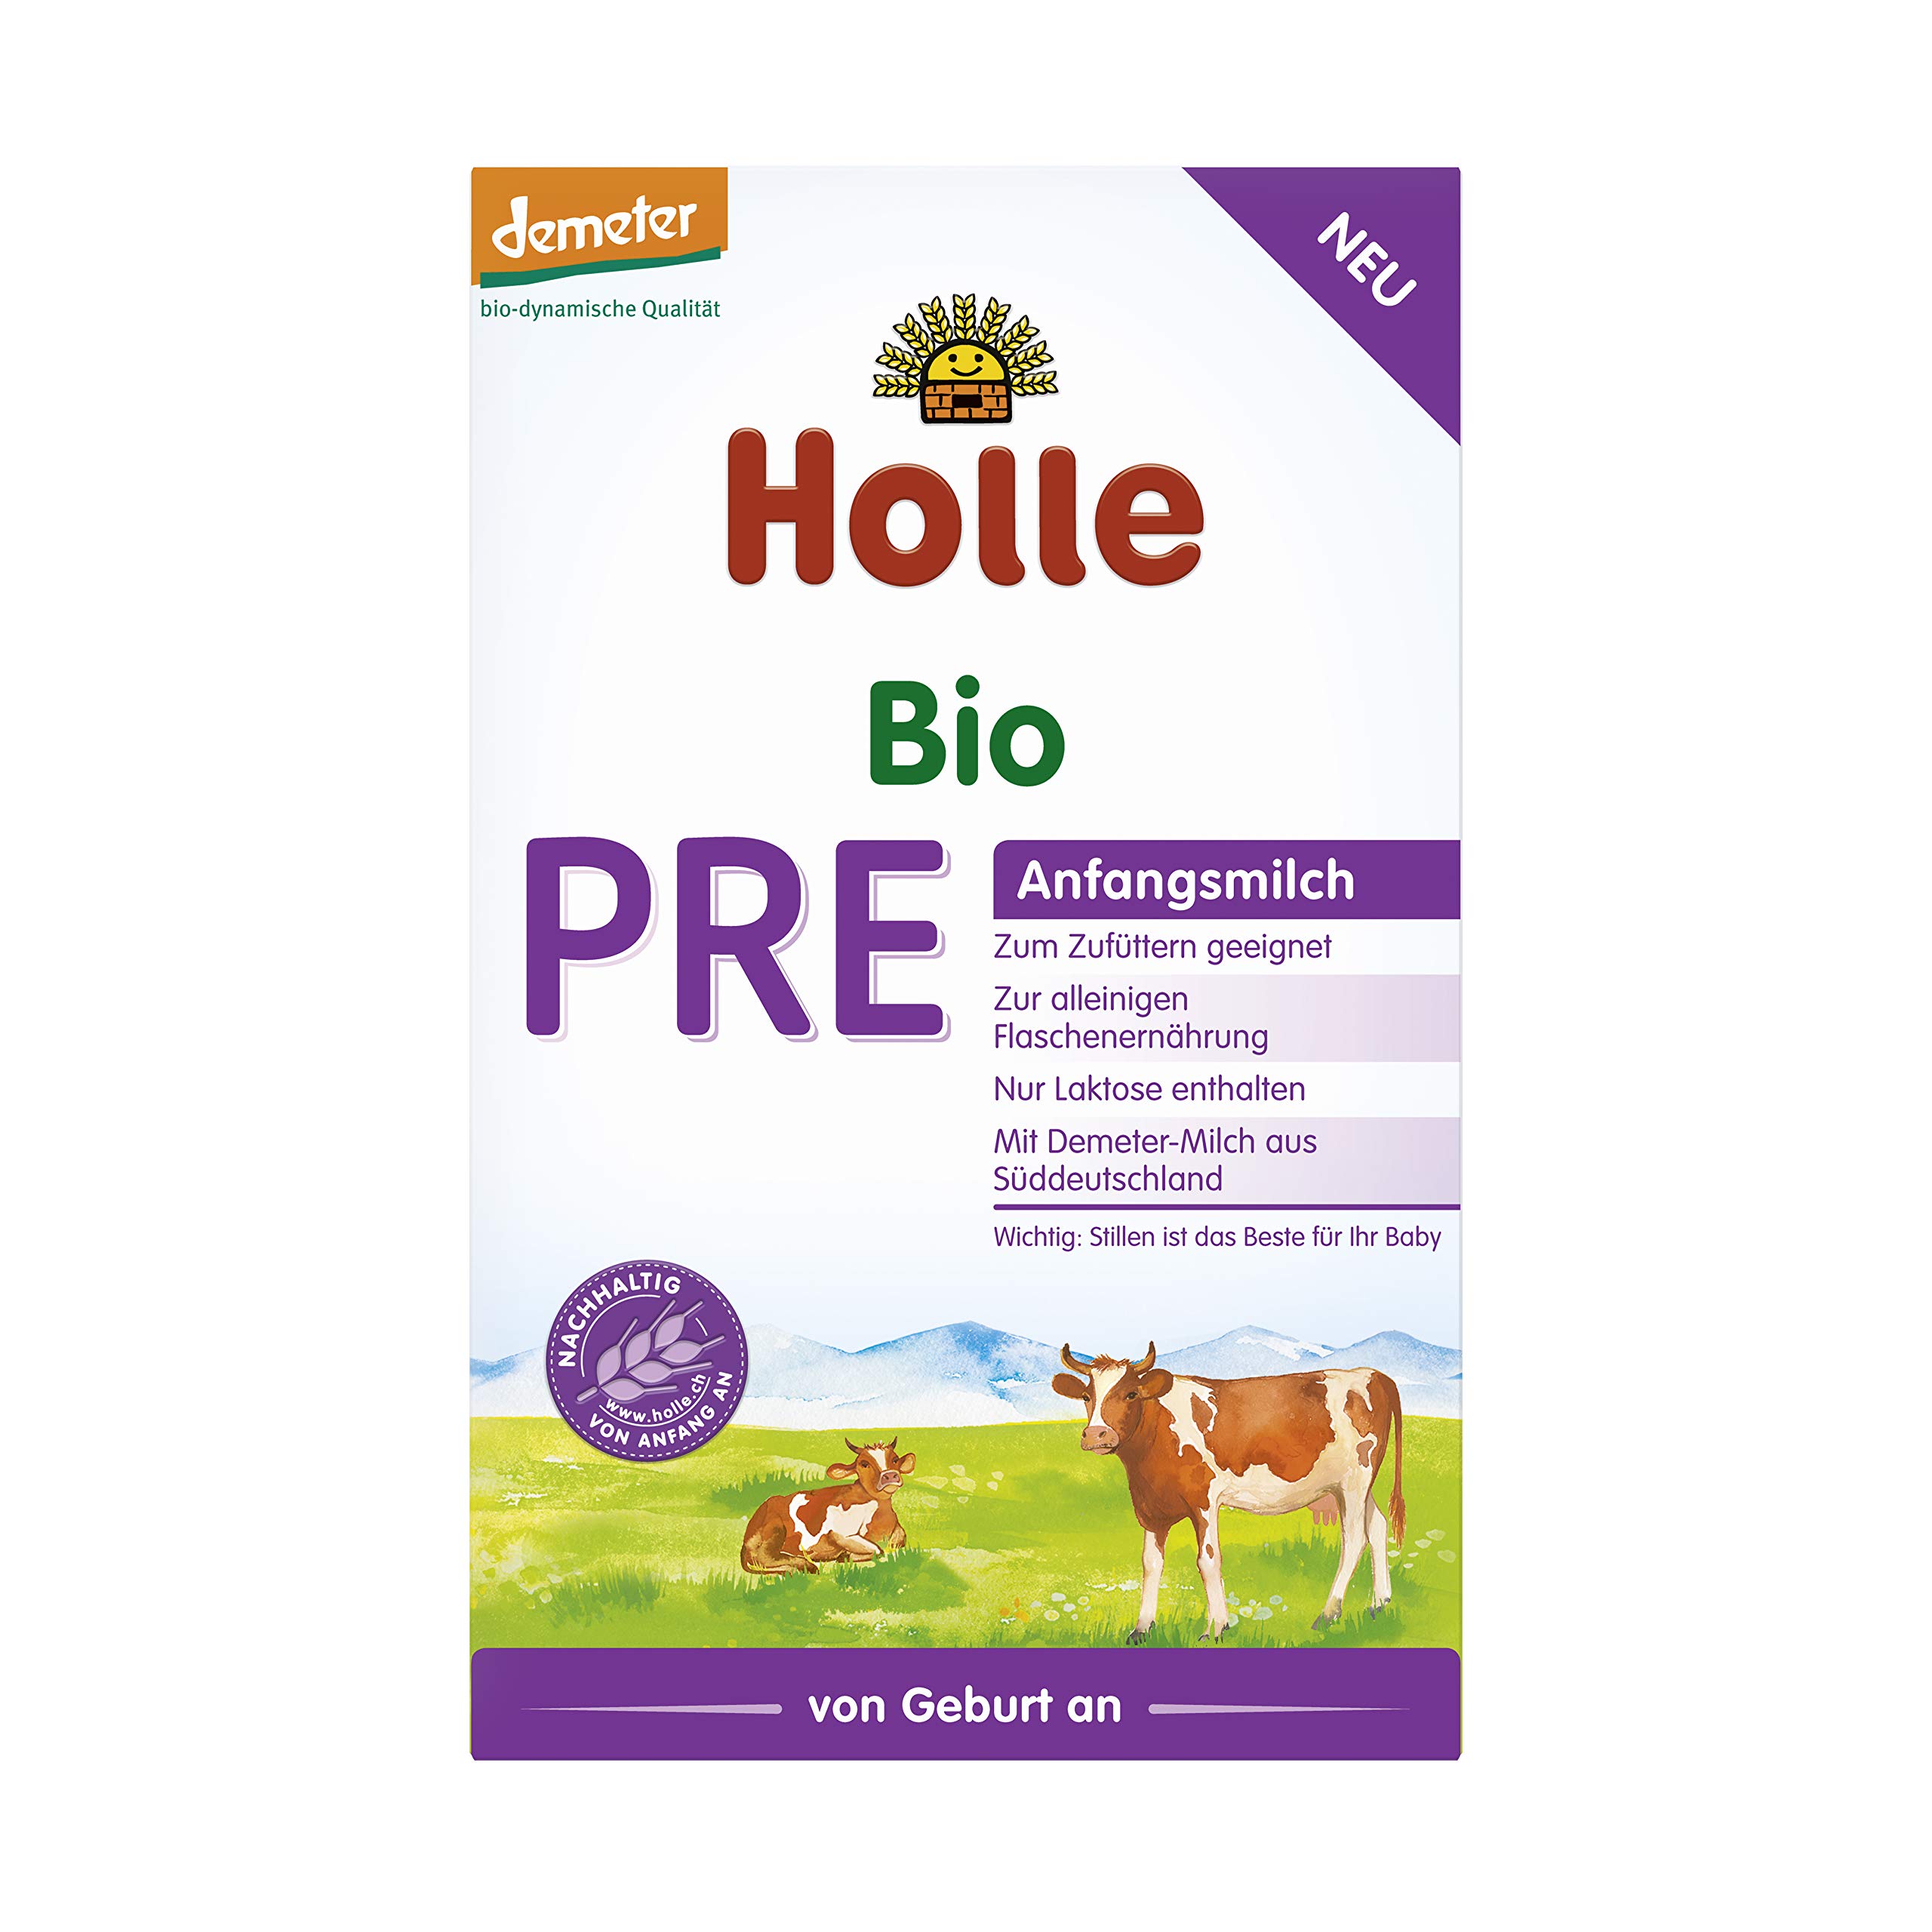 Holle Bio PRE-Anfangsmilch 400 g (6 x 400g)